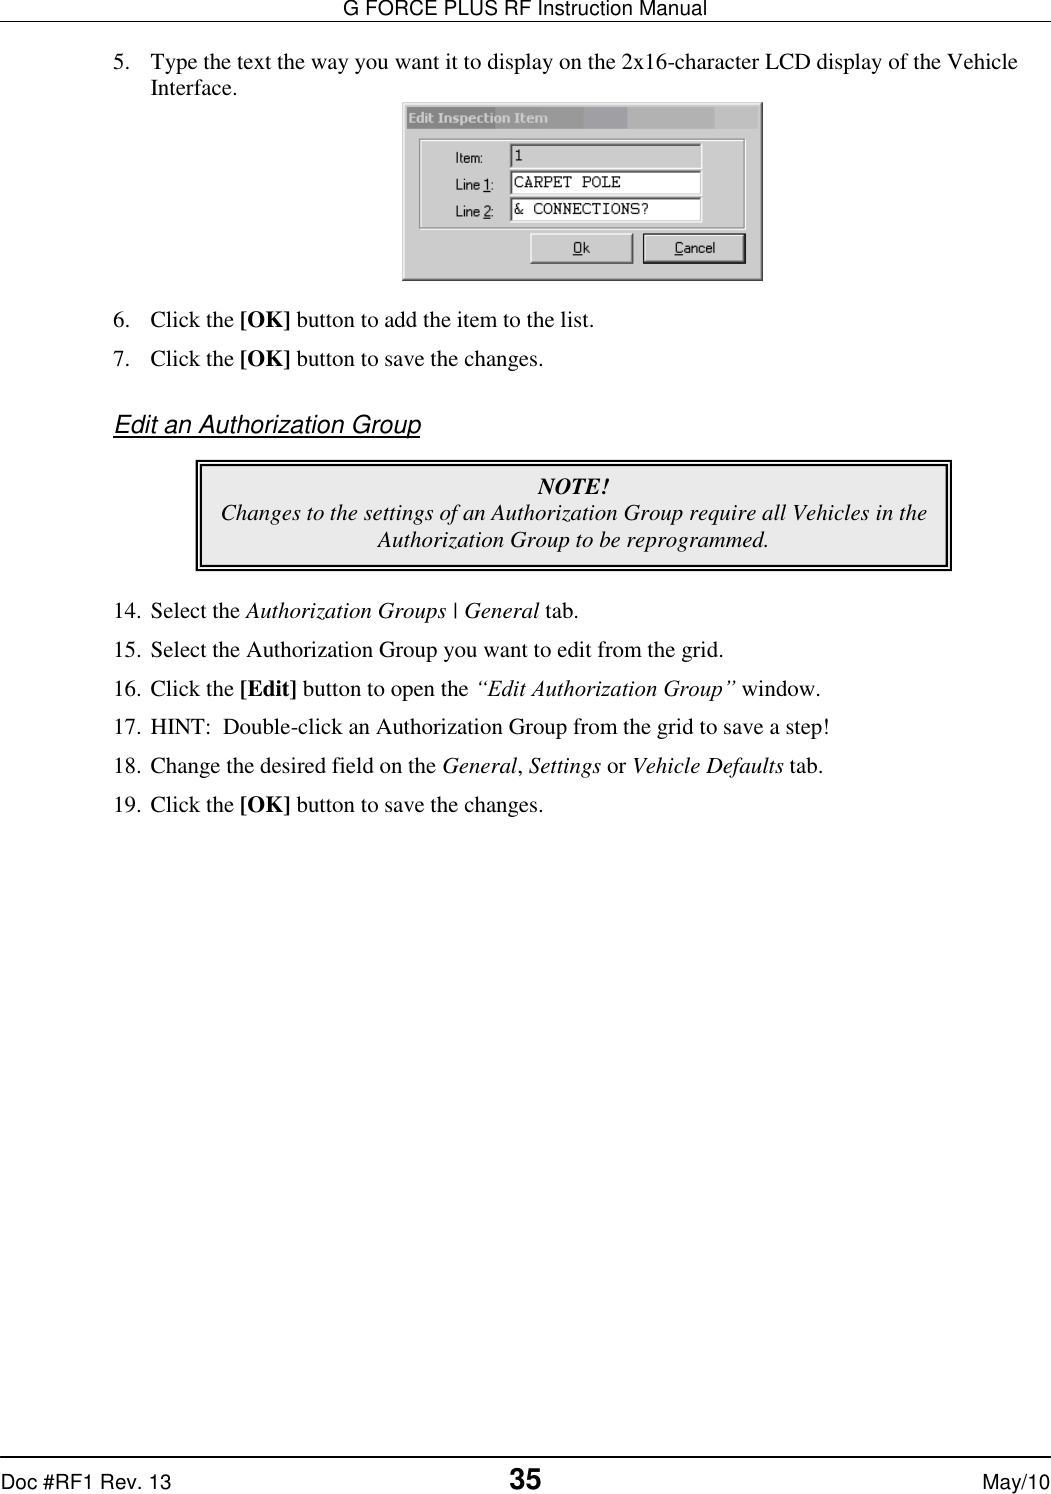 G FORCE PLUS RF Instruction Manual   Doc #RF1 Rev. 13  35 May/10 5. Type the text the way you want it to display on the 2x16-character LCD display of the Vehicle Interface.   6. Click the [OK] button to add the item to the list. 7. Click the [OK] button to save the changes.  Edit an Authorization Group       14. Select the Authorization Groups | General tab. 15. Select the Authorization Group you want to edit from the grid. 16. Click the [Edit] button to open the “Edit Authorization Group” window. 17. HINT:  Double-click an Authorization Group from the grid to save a step! 18. Change the desired field on the General, Settings or Vehicle Defaults tab. 19. Click the [OK] button to save the changes.  NOTE! Changes to the settings of an Authorization Group require all Vehicles in the Authorization Group to be reprogrammed.   